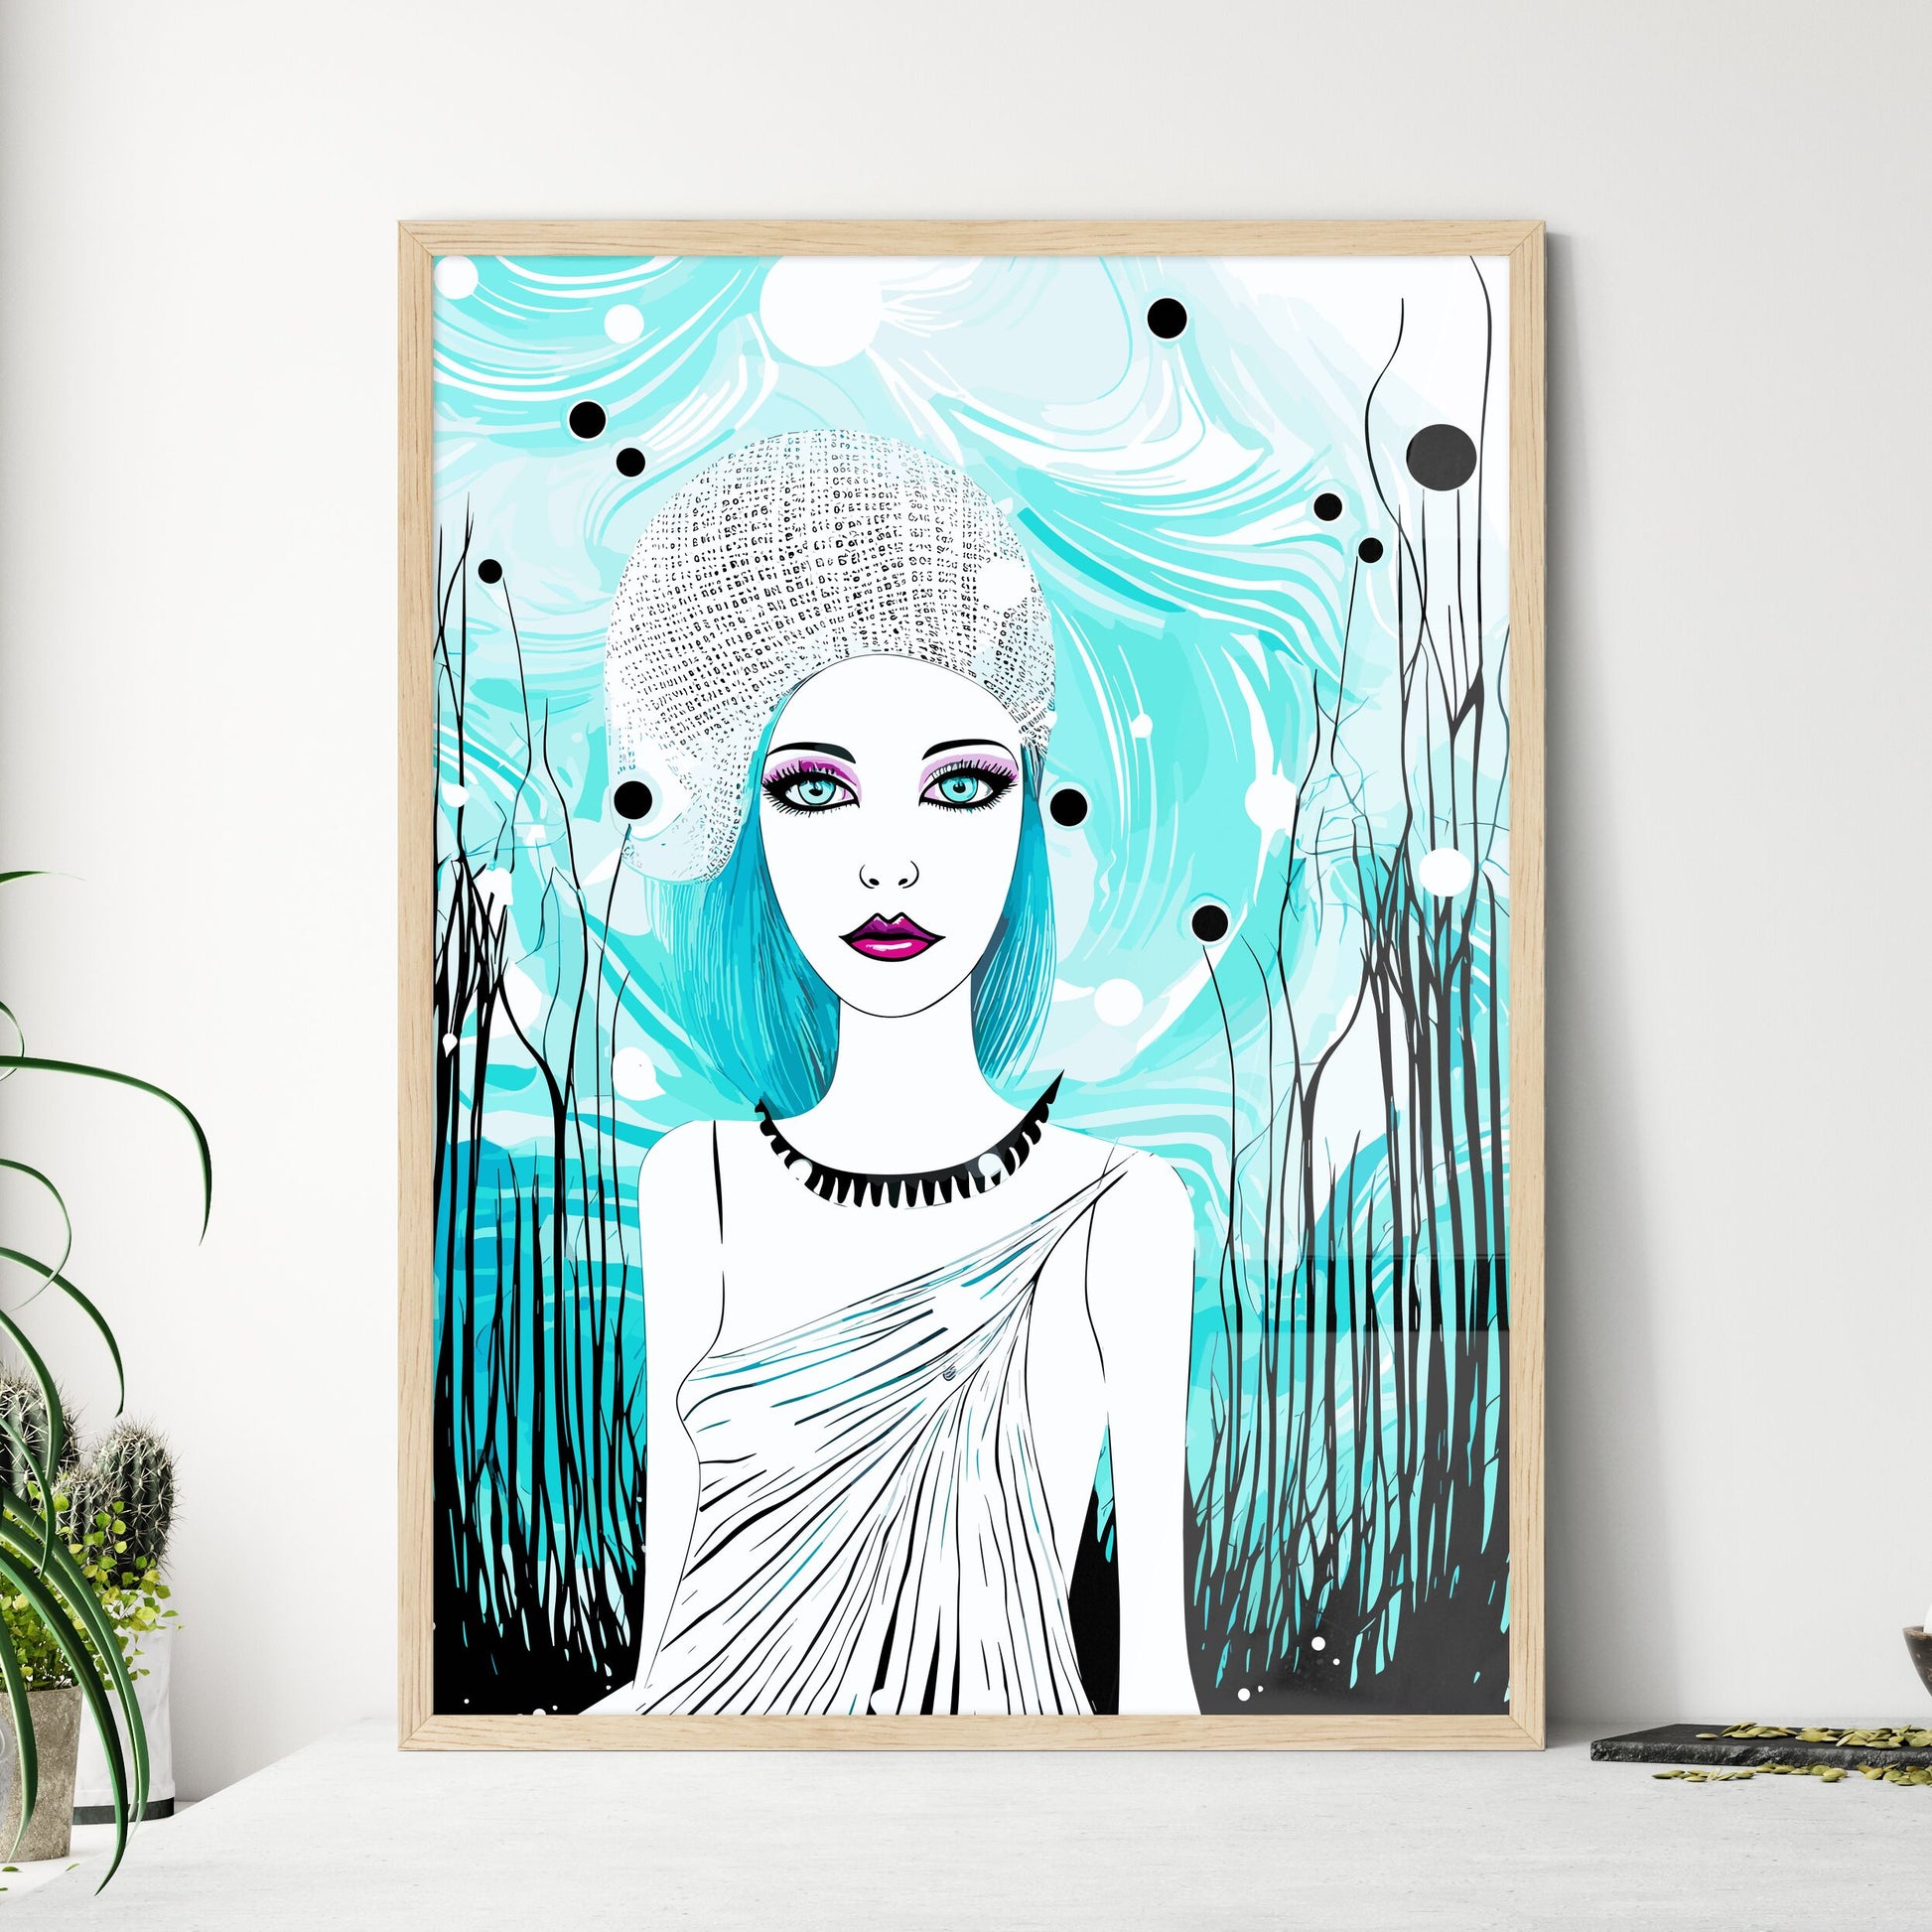 Lifestyle Fashion Illustration In The Disco Club - A Woman With Blue Hair And A White Hat Default Title